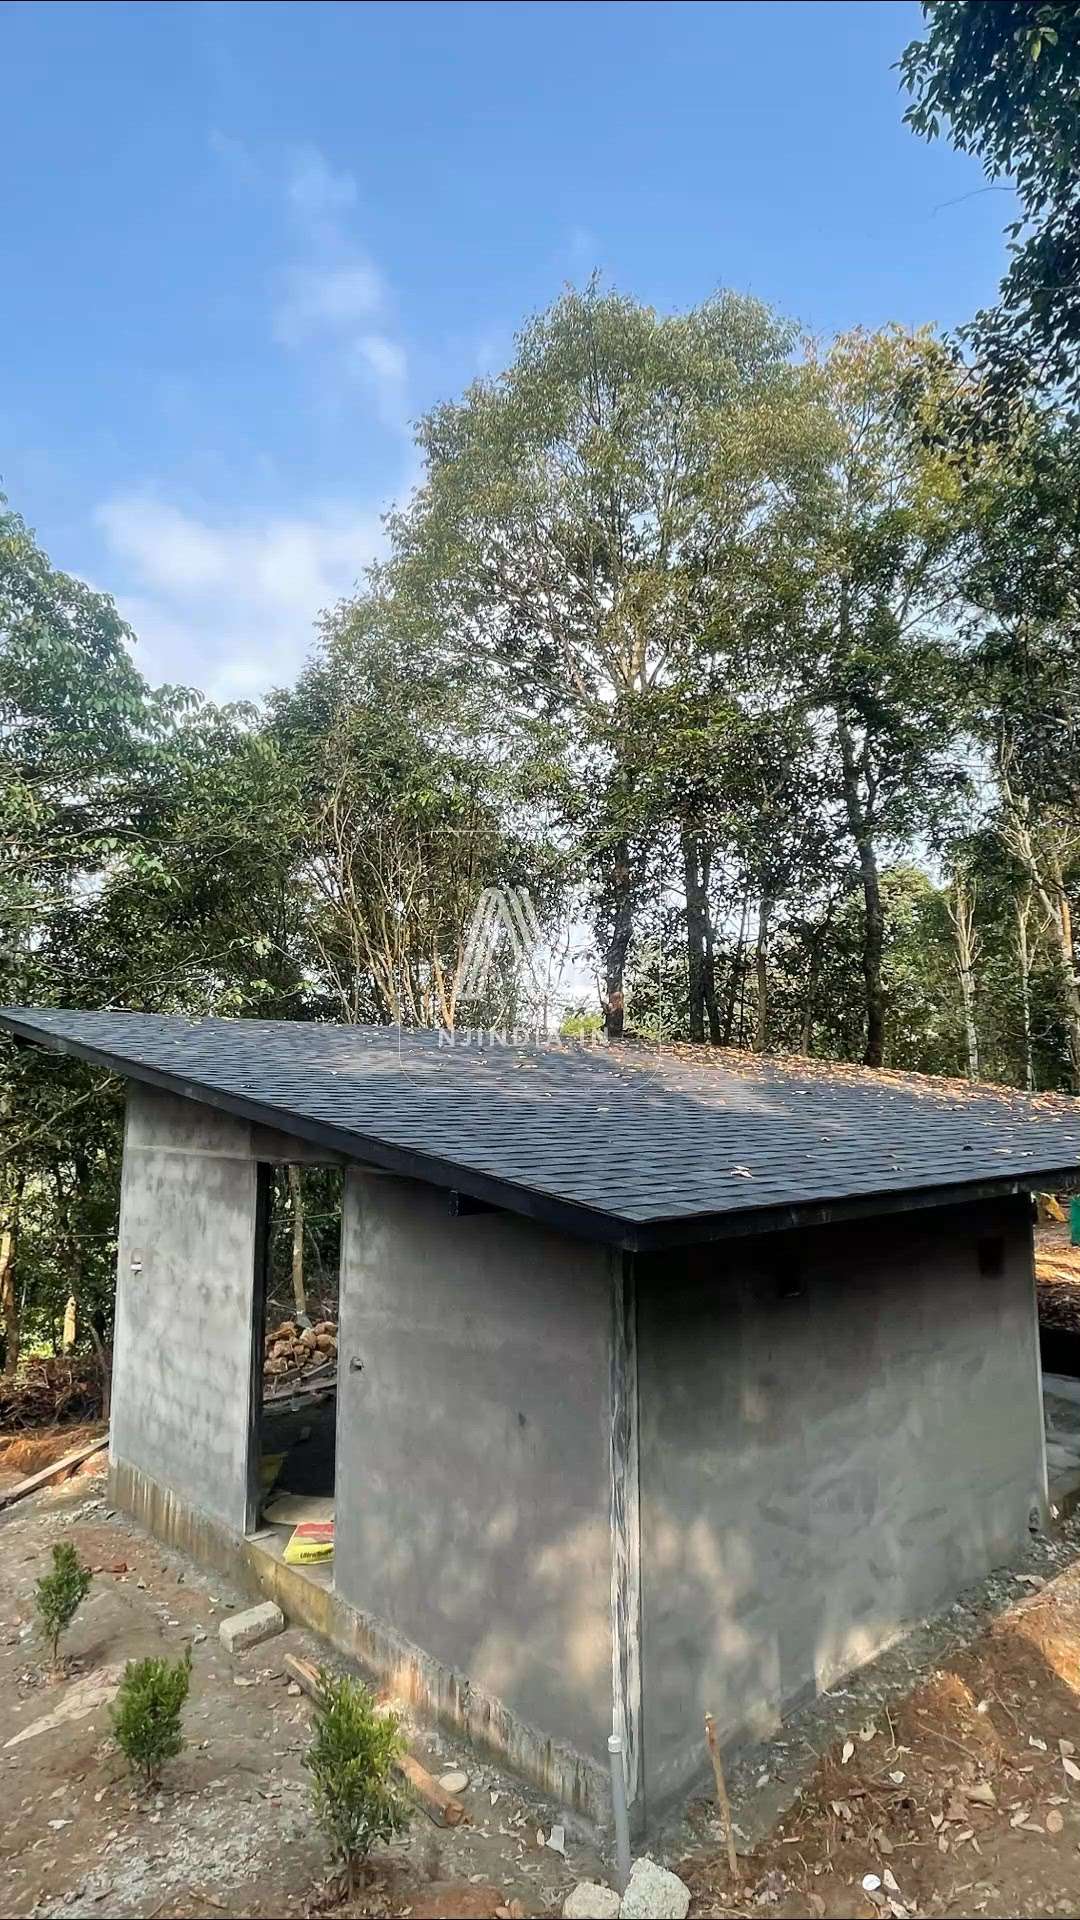 New Roofing Completed✨💯🏠
NjIndia, Your Complete Roofing Solution Partner 🤩
.
.
 #RoofingIdeas  #RoofingDesigns  #RoofingShingles  #roofing #bestroofingshingles #bestrooftilesinkerala #koloapp